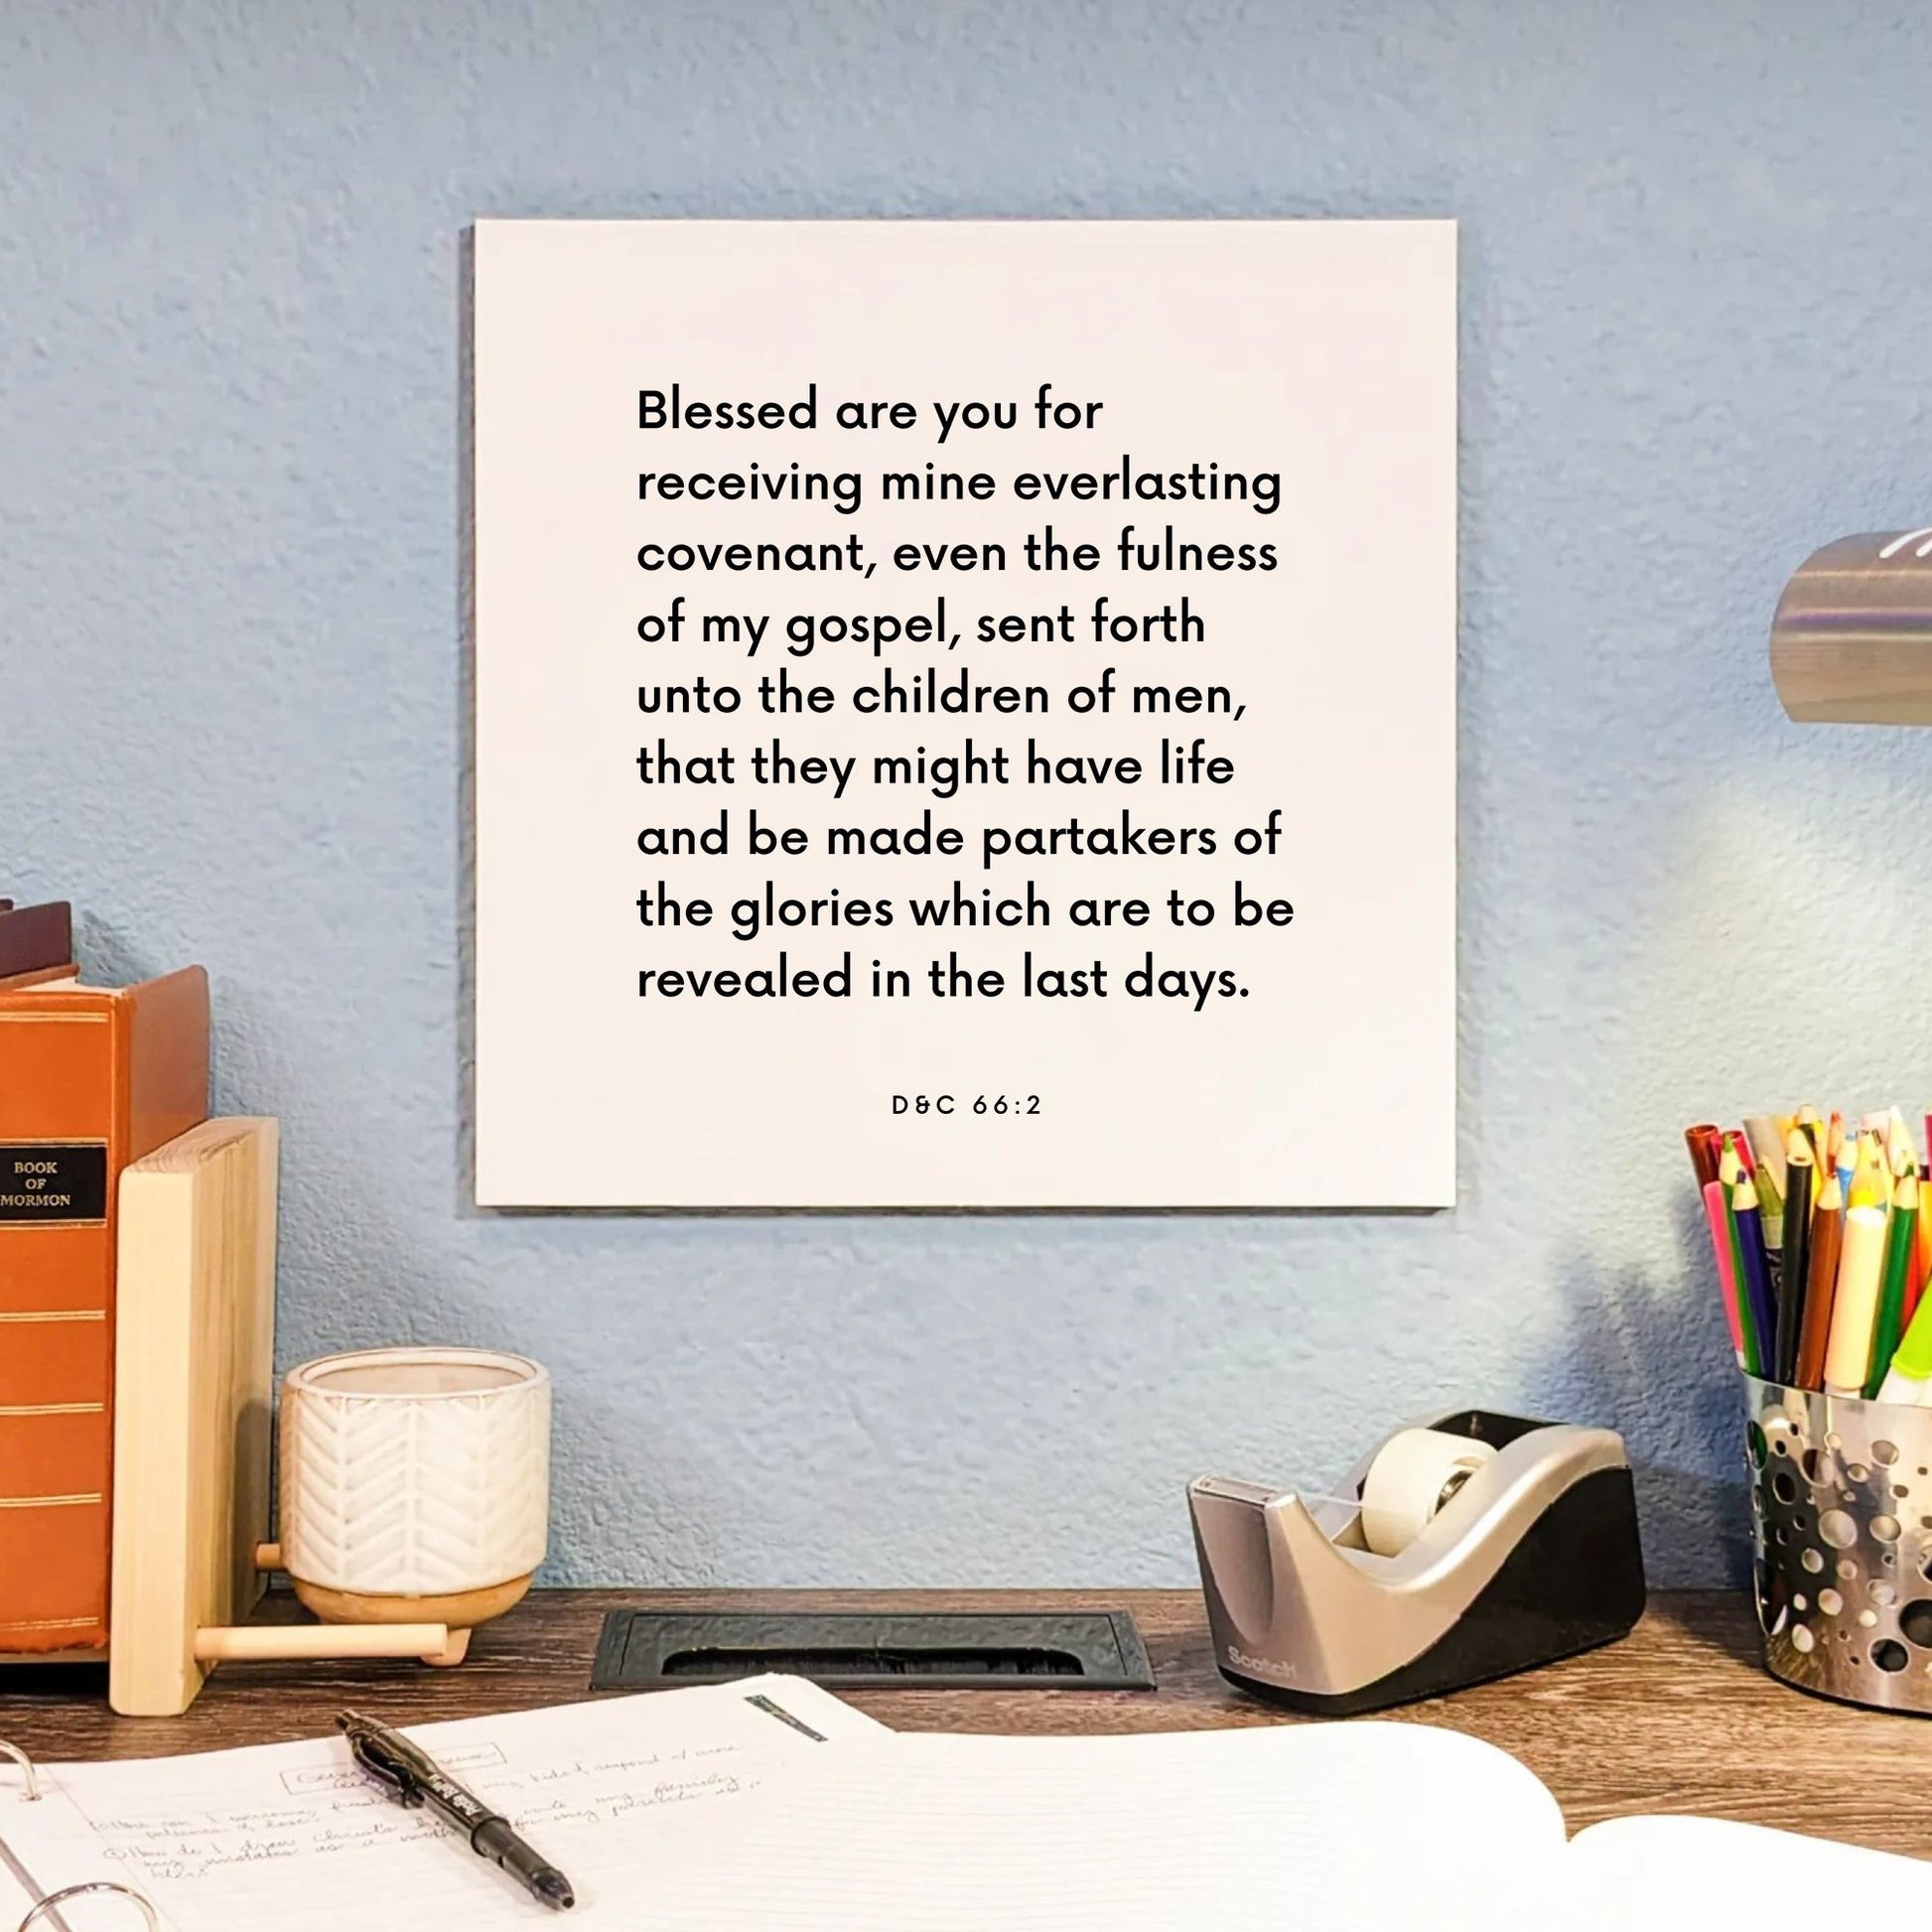 Desk mouting of the scripture tile for D&C 66:2 - "Blessed are you for receiving mine everlasting covenant"